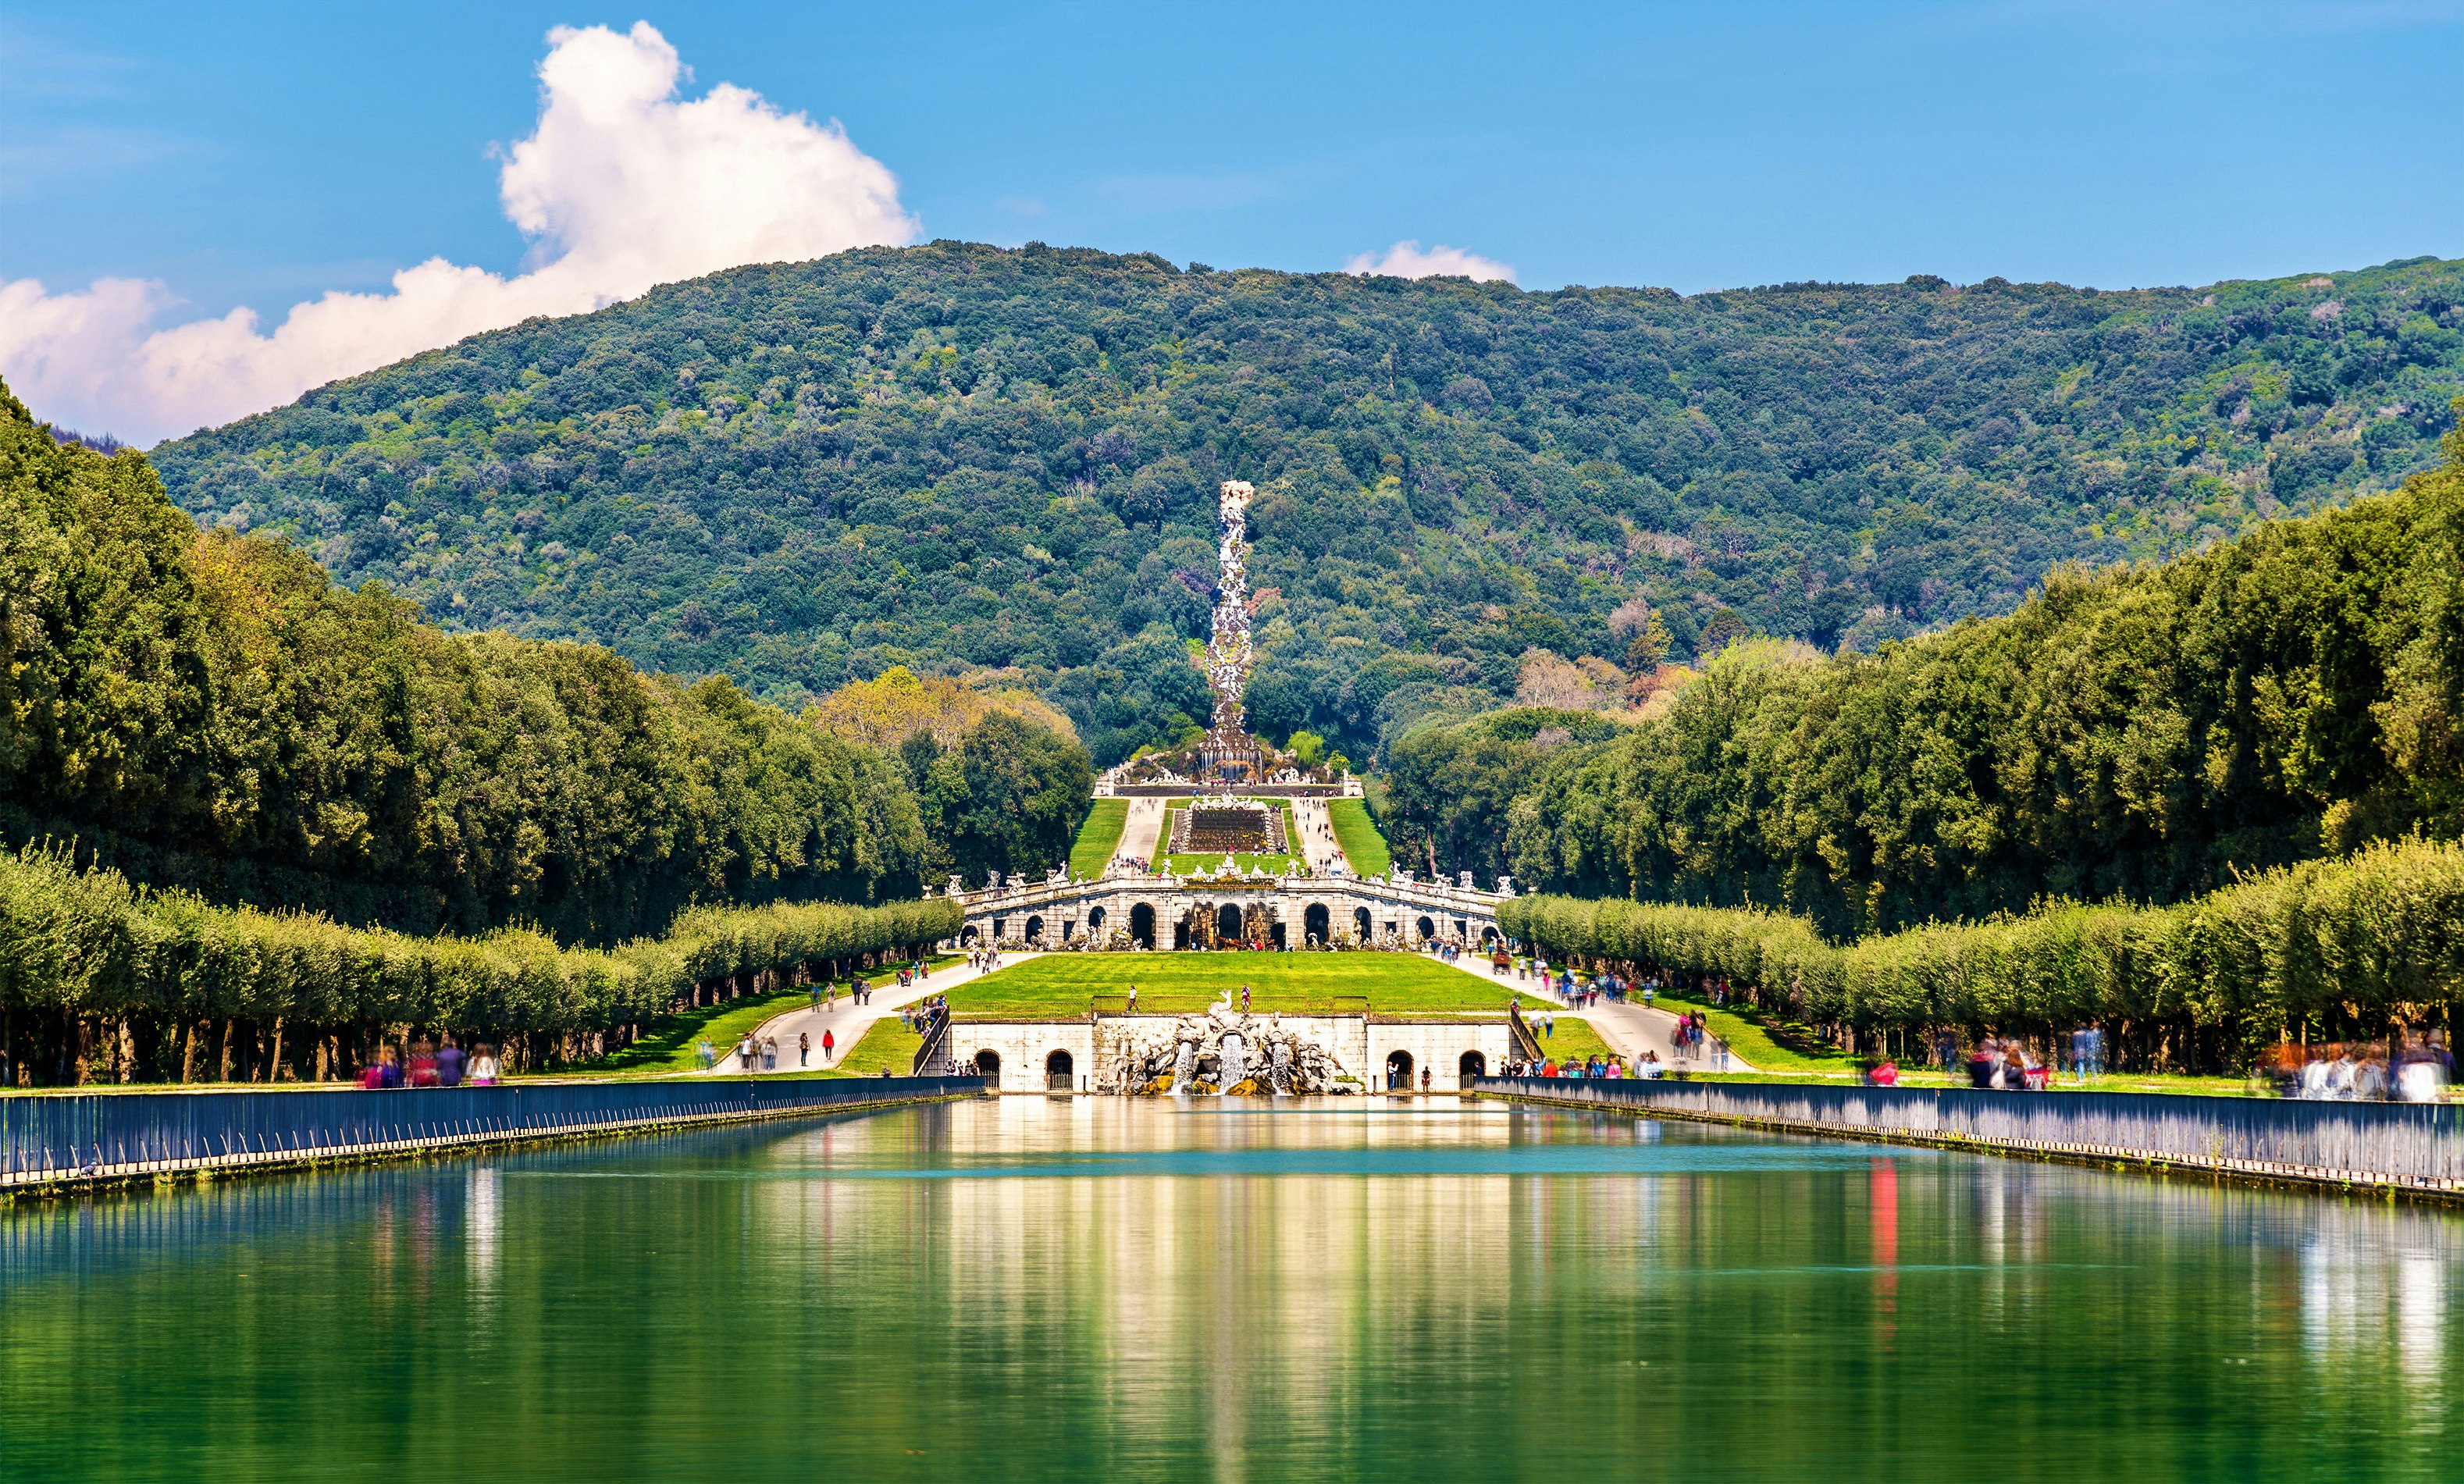 A picture of the vast gardens of the Palace of Caserta on a very beautiful and sunny day